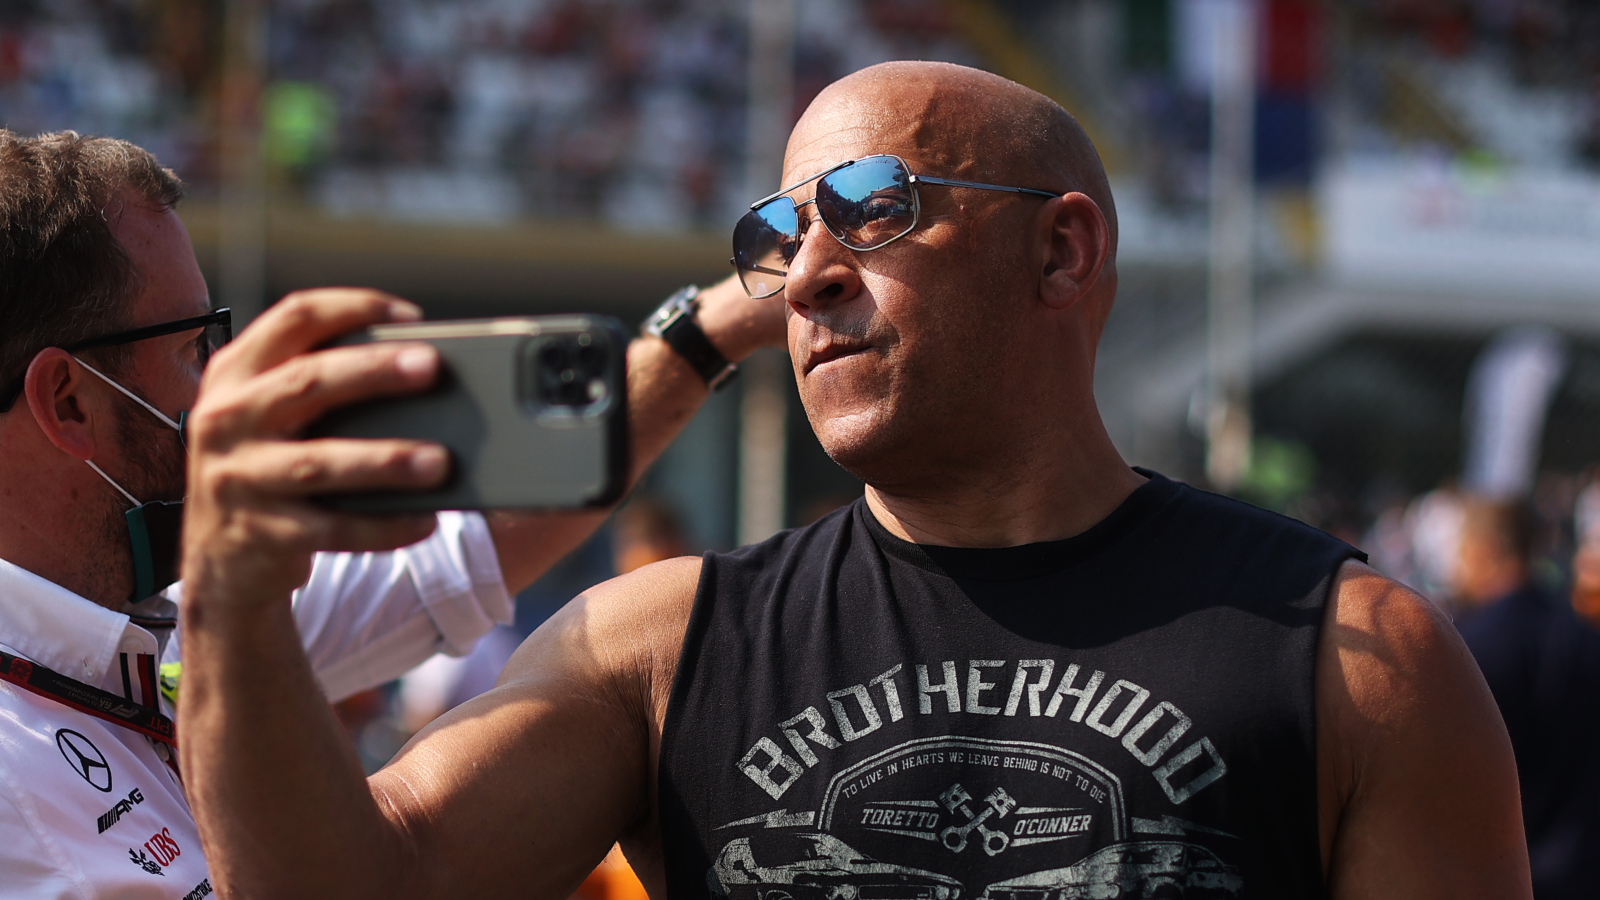 Vin Diesel is usually on the big screen, but here he's just taking a selfie at the F1 Grand Prix of Italy.